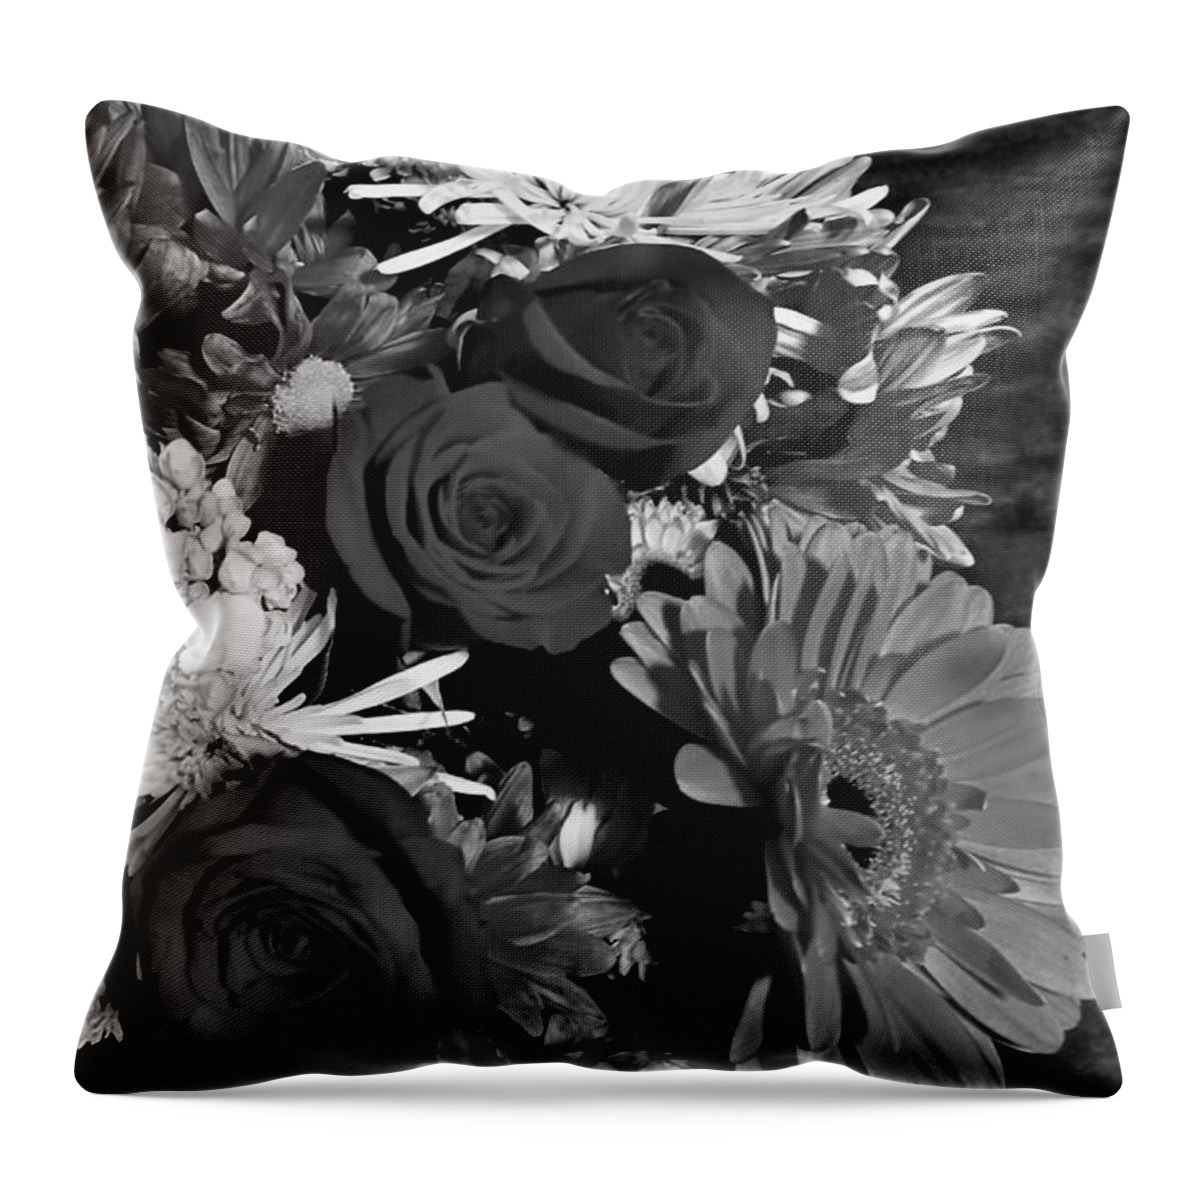 Roses Throw Pillow featuring the photograph Three Roses by John Anderson